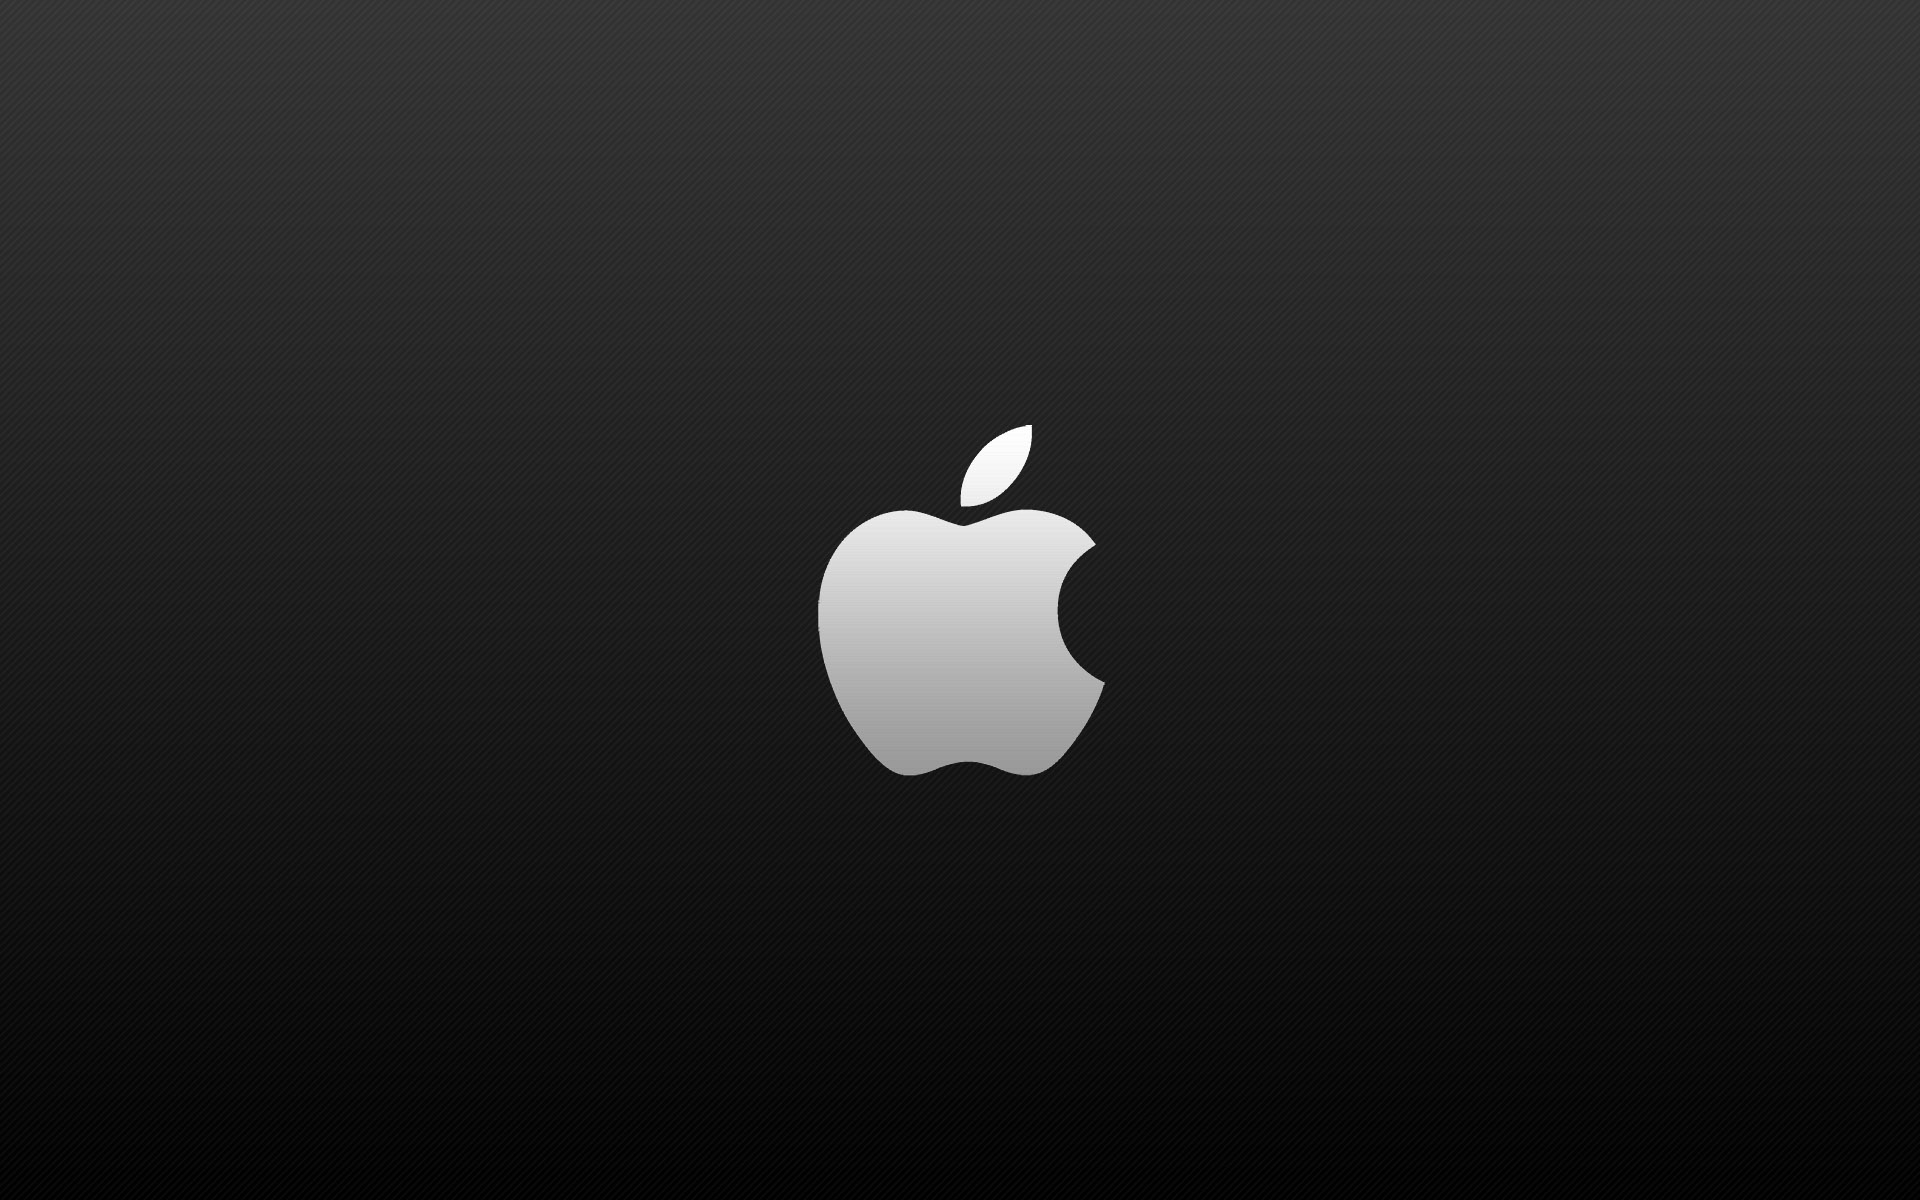 logo wallpapers cool background apple photo wallpaper